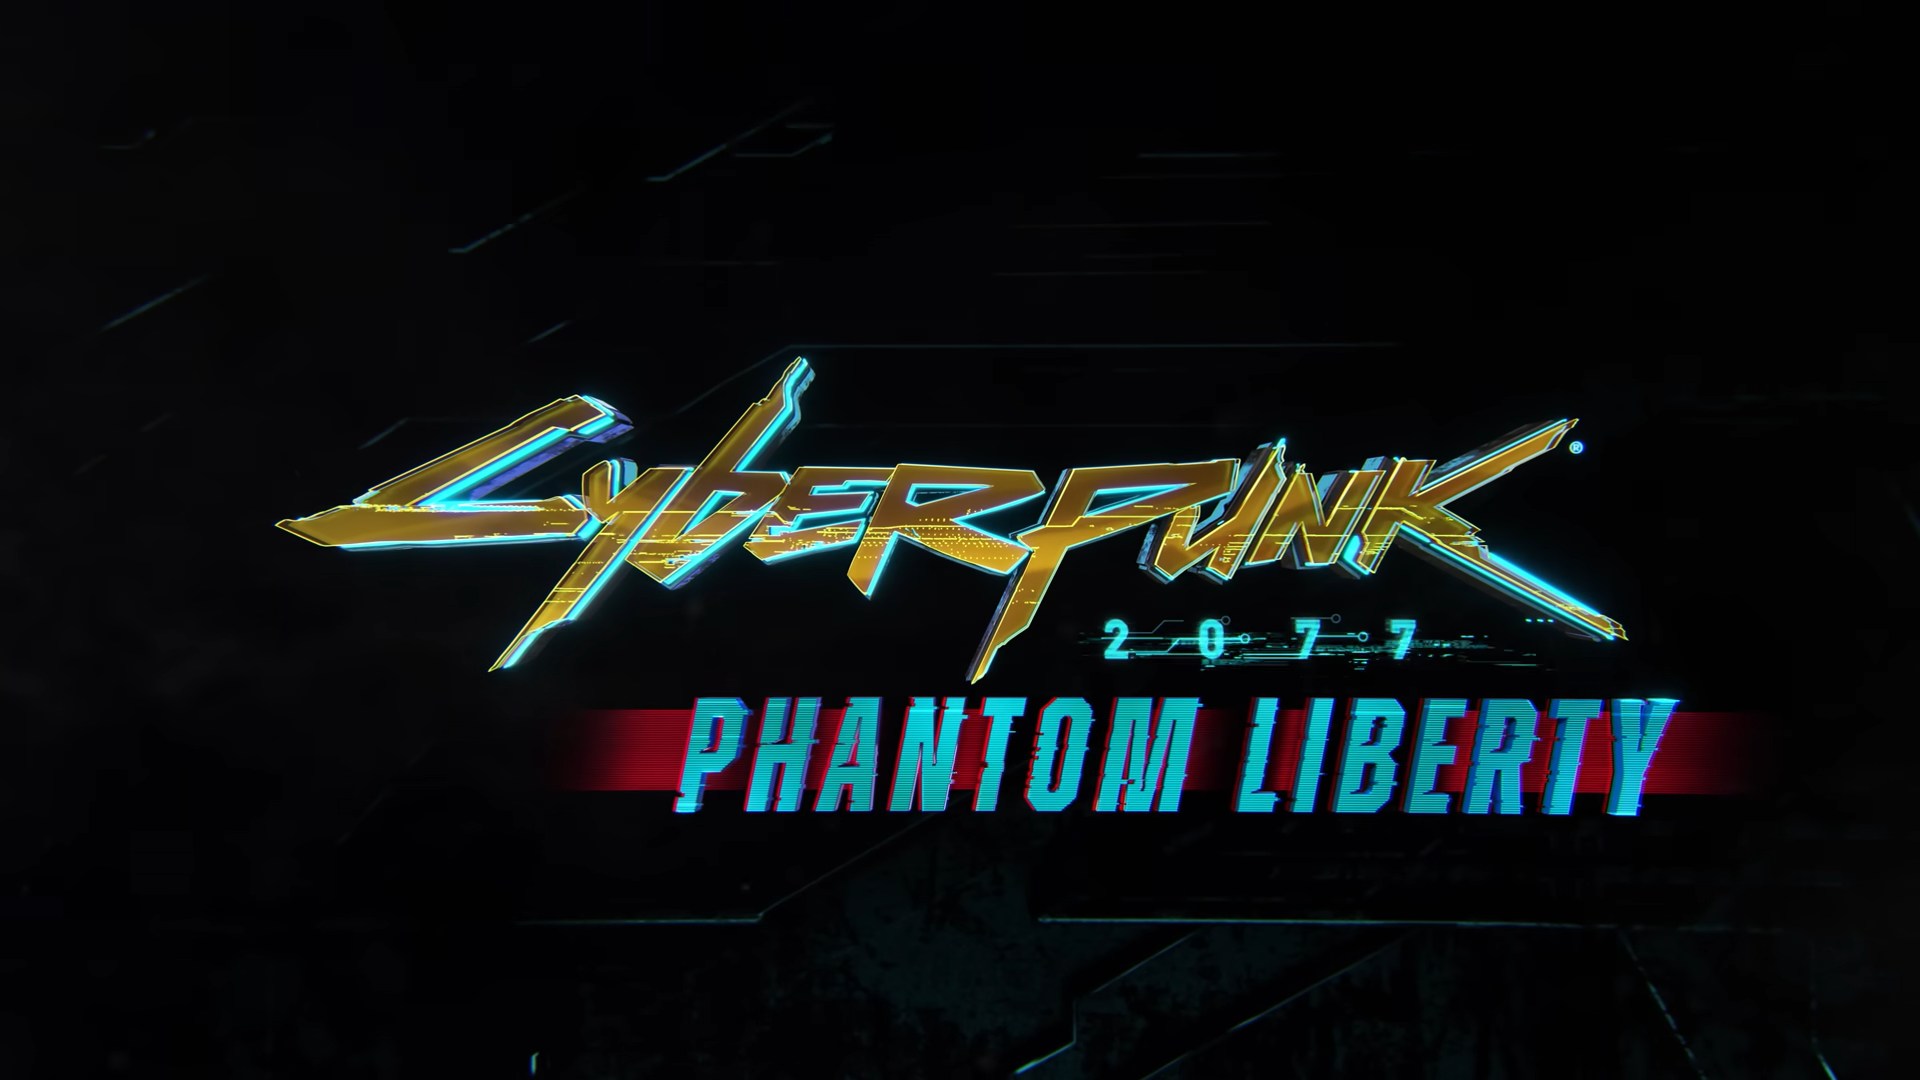 Image for Phantom Liberty confirmed to be paid expansion for Cyberpunk 2077